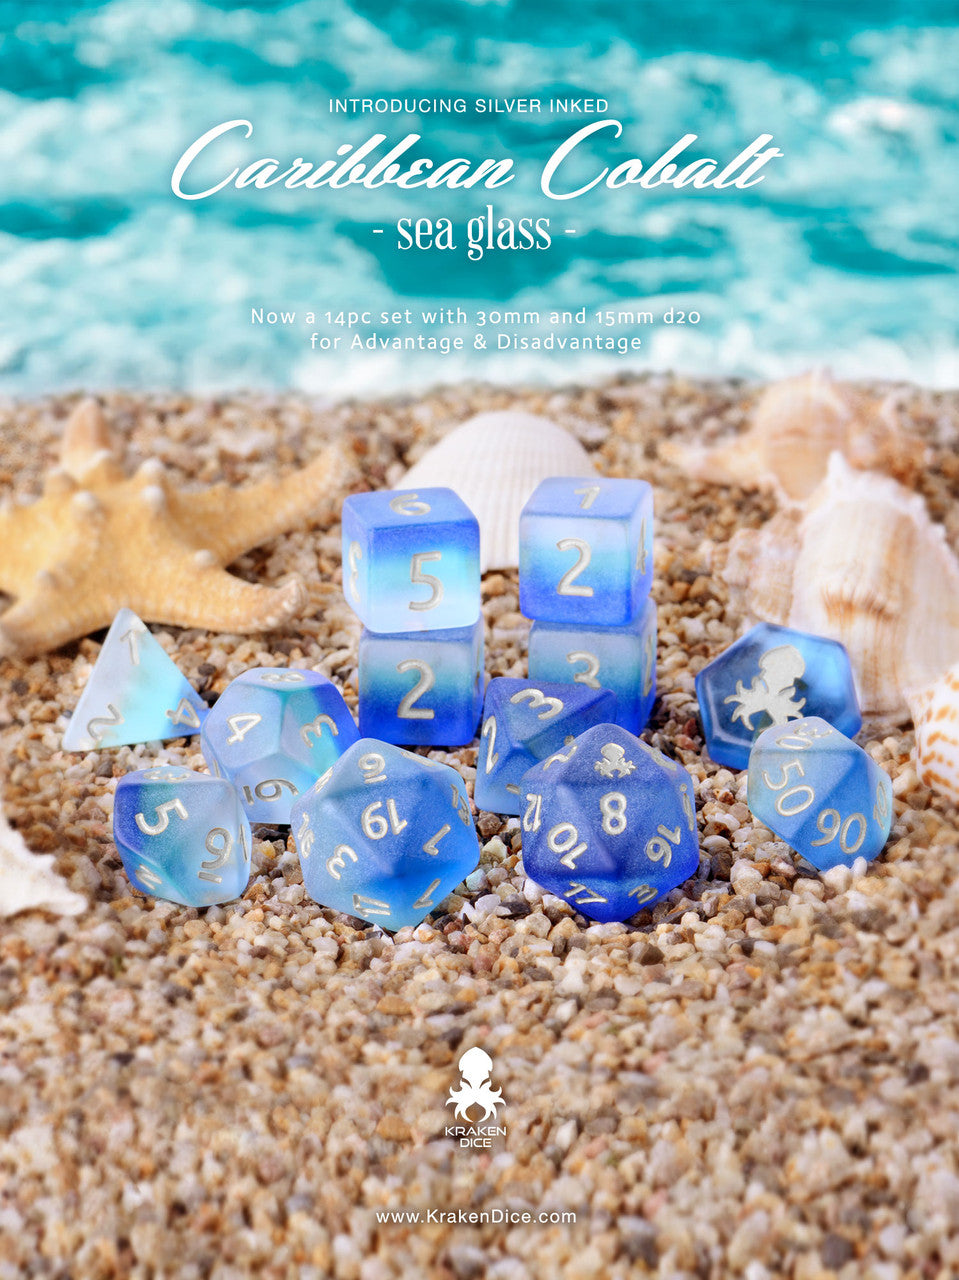 Caribbean Cobalt 14pc Dice Set inked in Silver